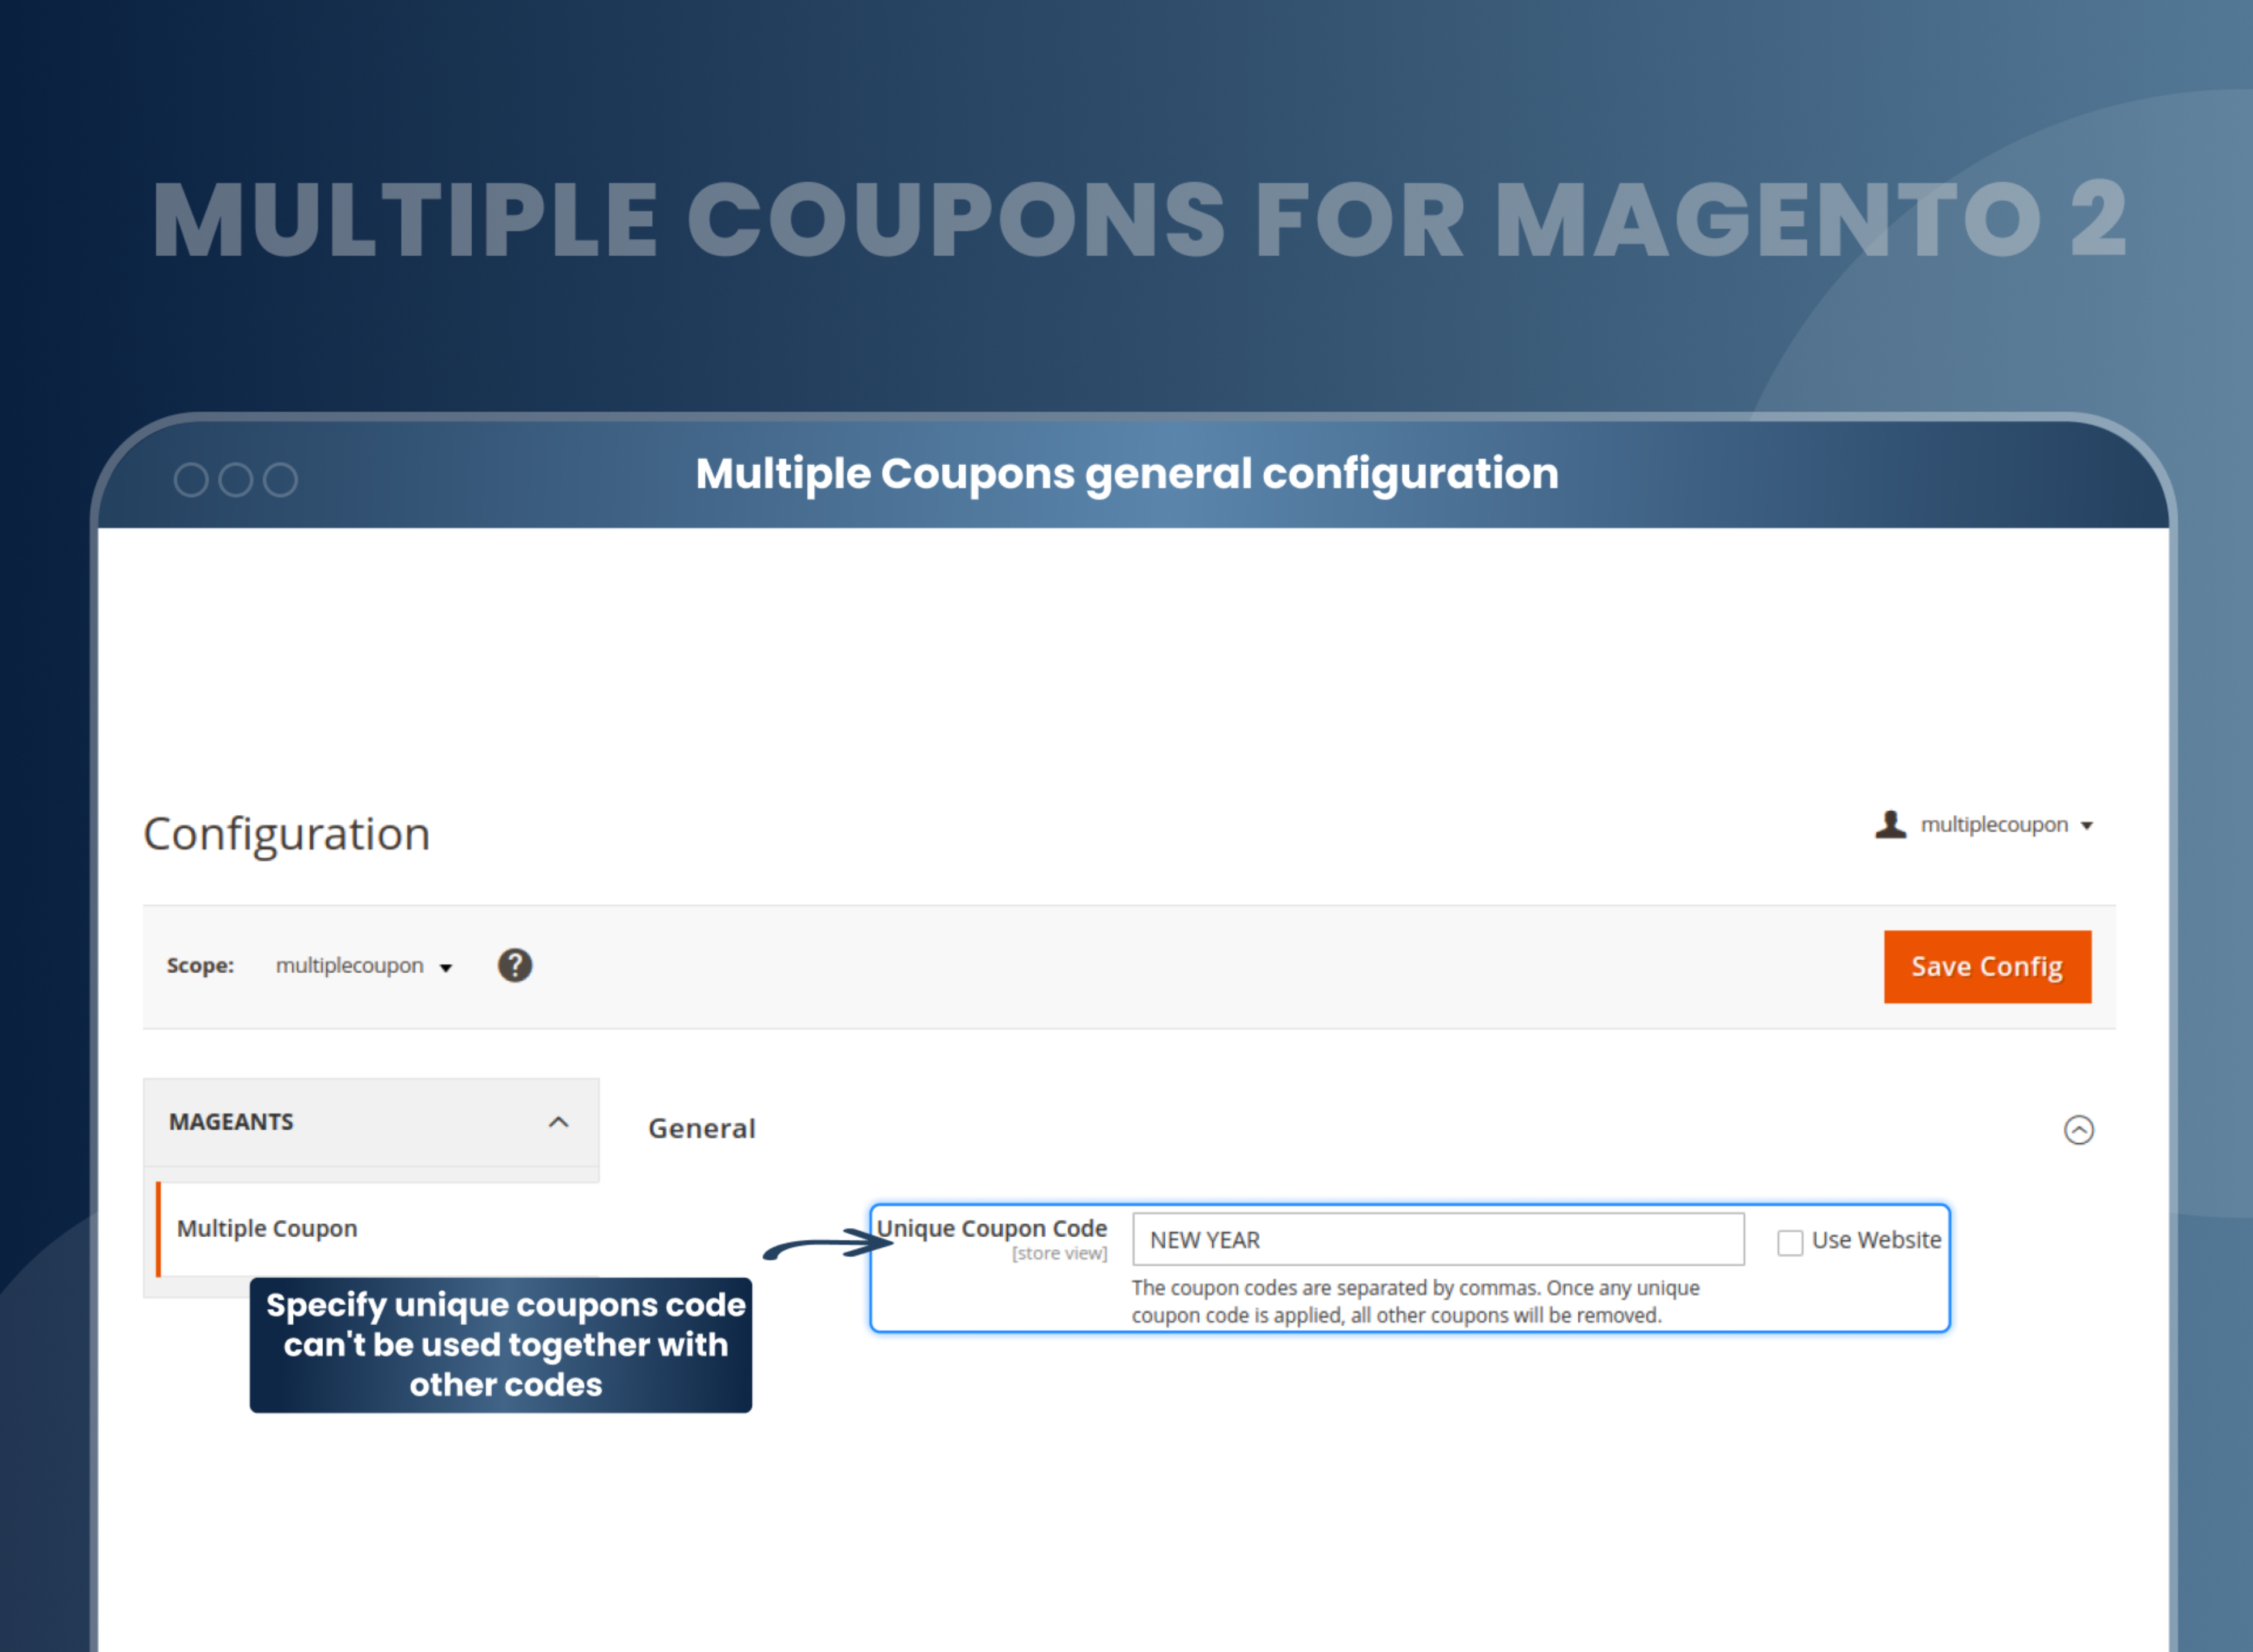 Multiple Coupons general configuration